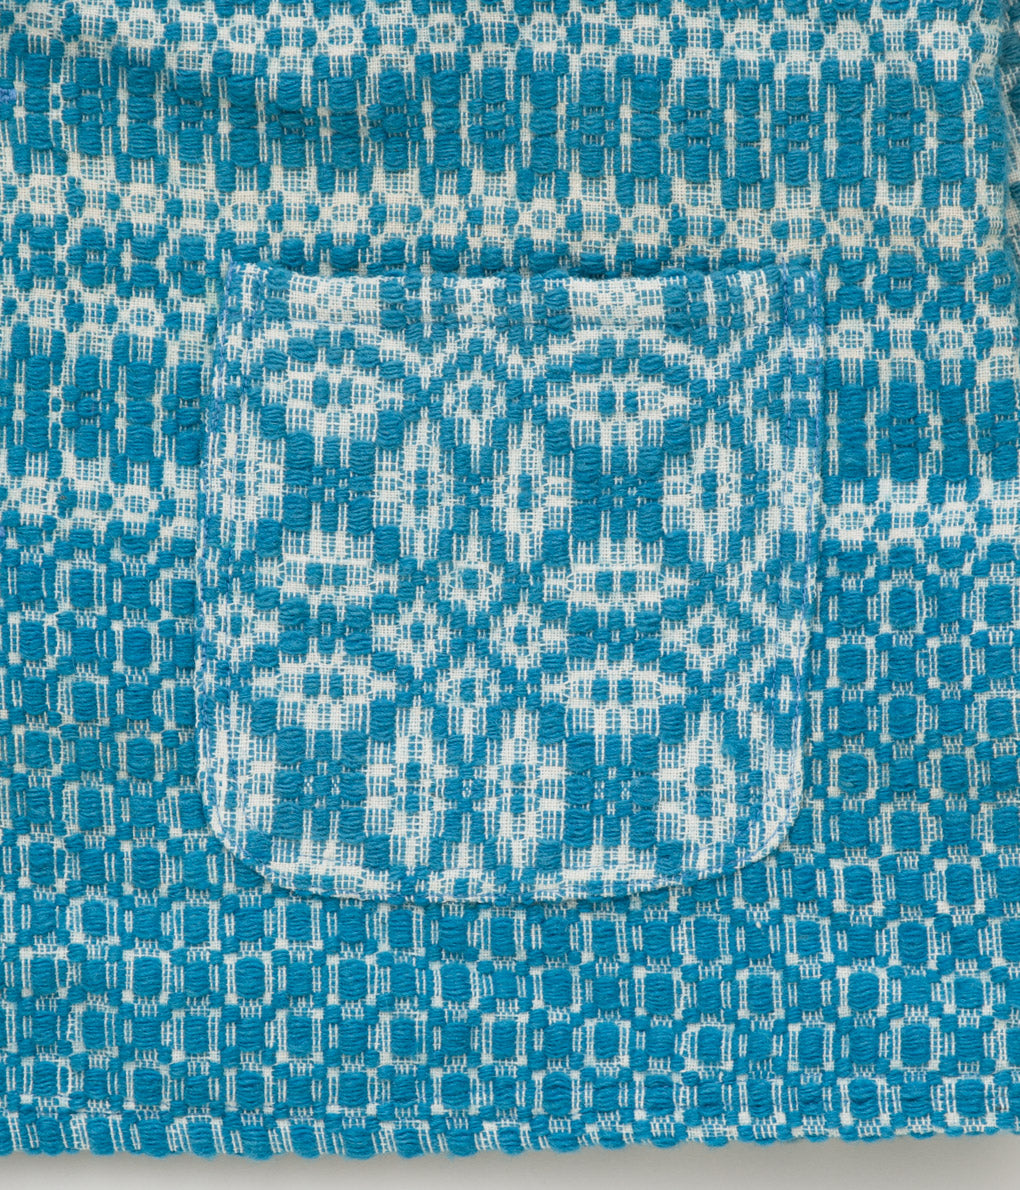 FAREWELL FRANCES "WOOL COVERLET CLAUDE COAT" (TURQUOISE COVERLET)